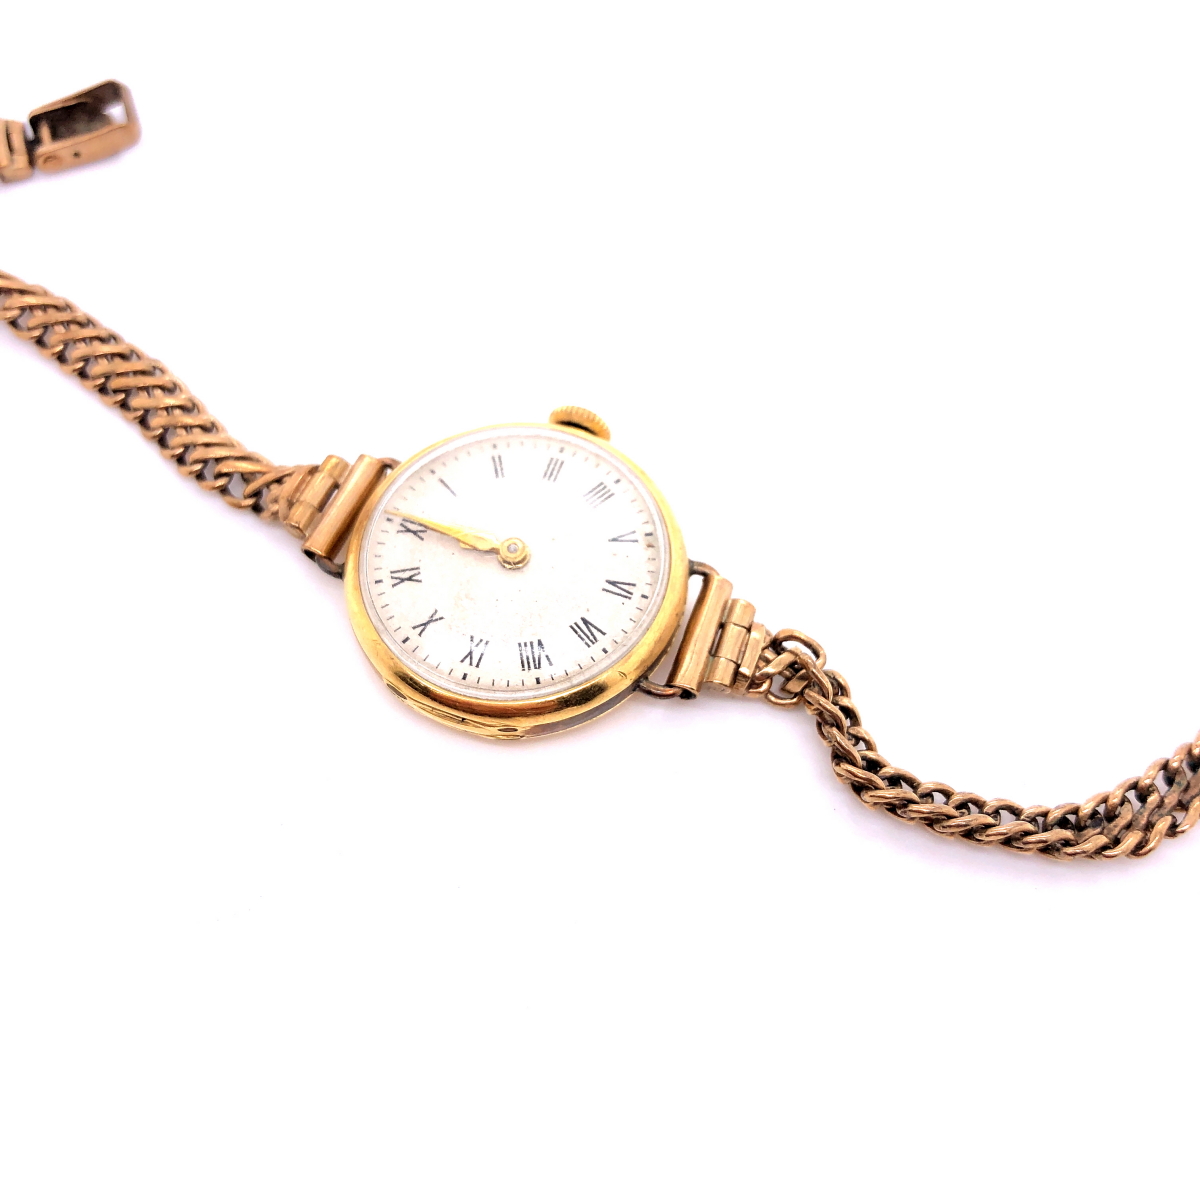 AN 18ct GOLD COCKTAIL WATCH FITTED WITH A 9ct GOLD BRACELET STRAP, A PAIR OF 9ct GOLD CUFFLINKS, - Image 5 of 31